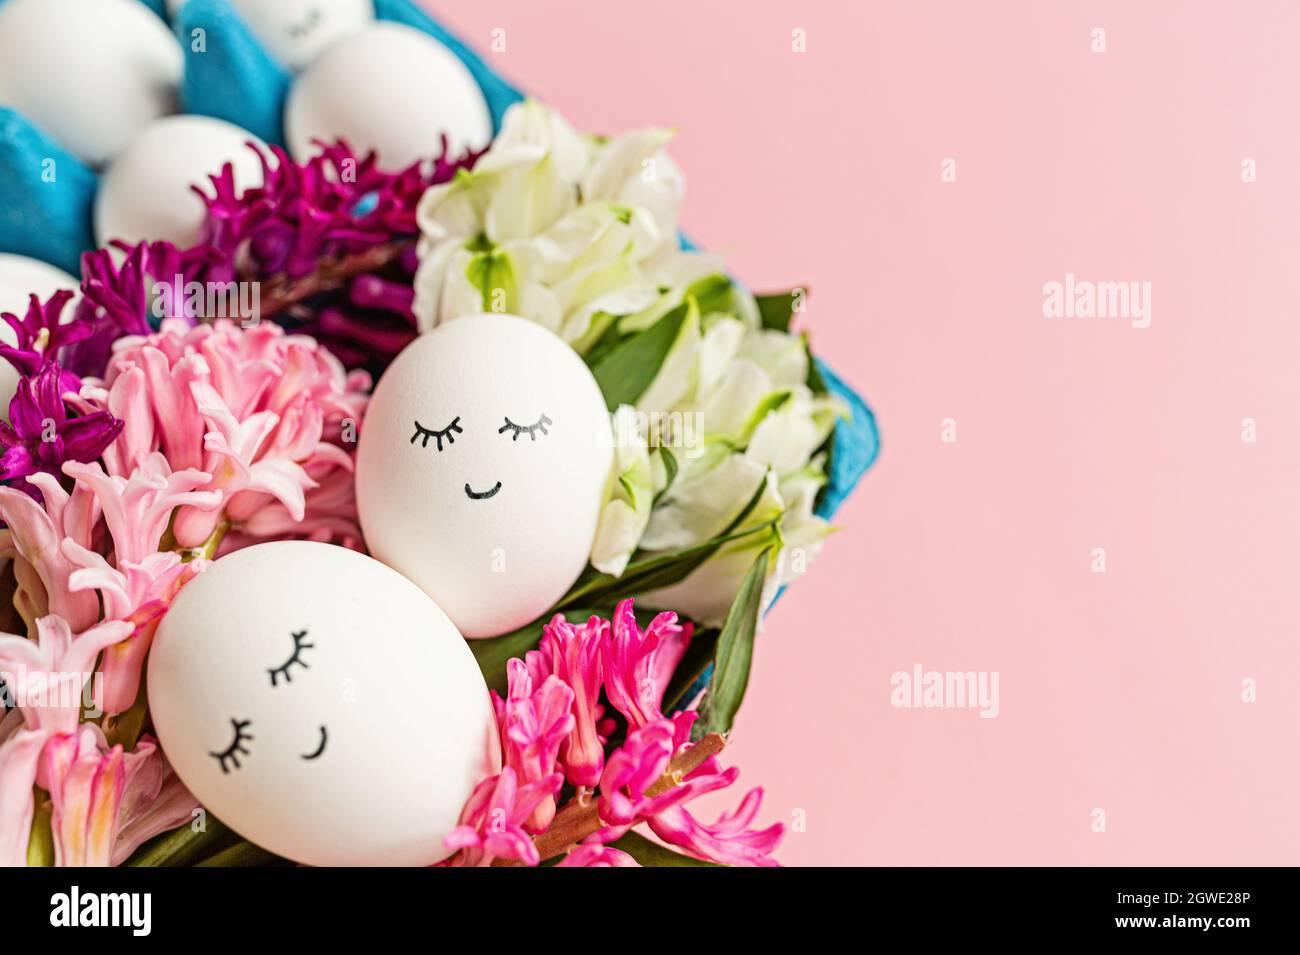 Creative Easter Eggs With Cute Face And Sleepy Eyes On Pastel Pink